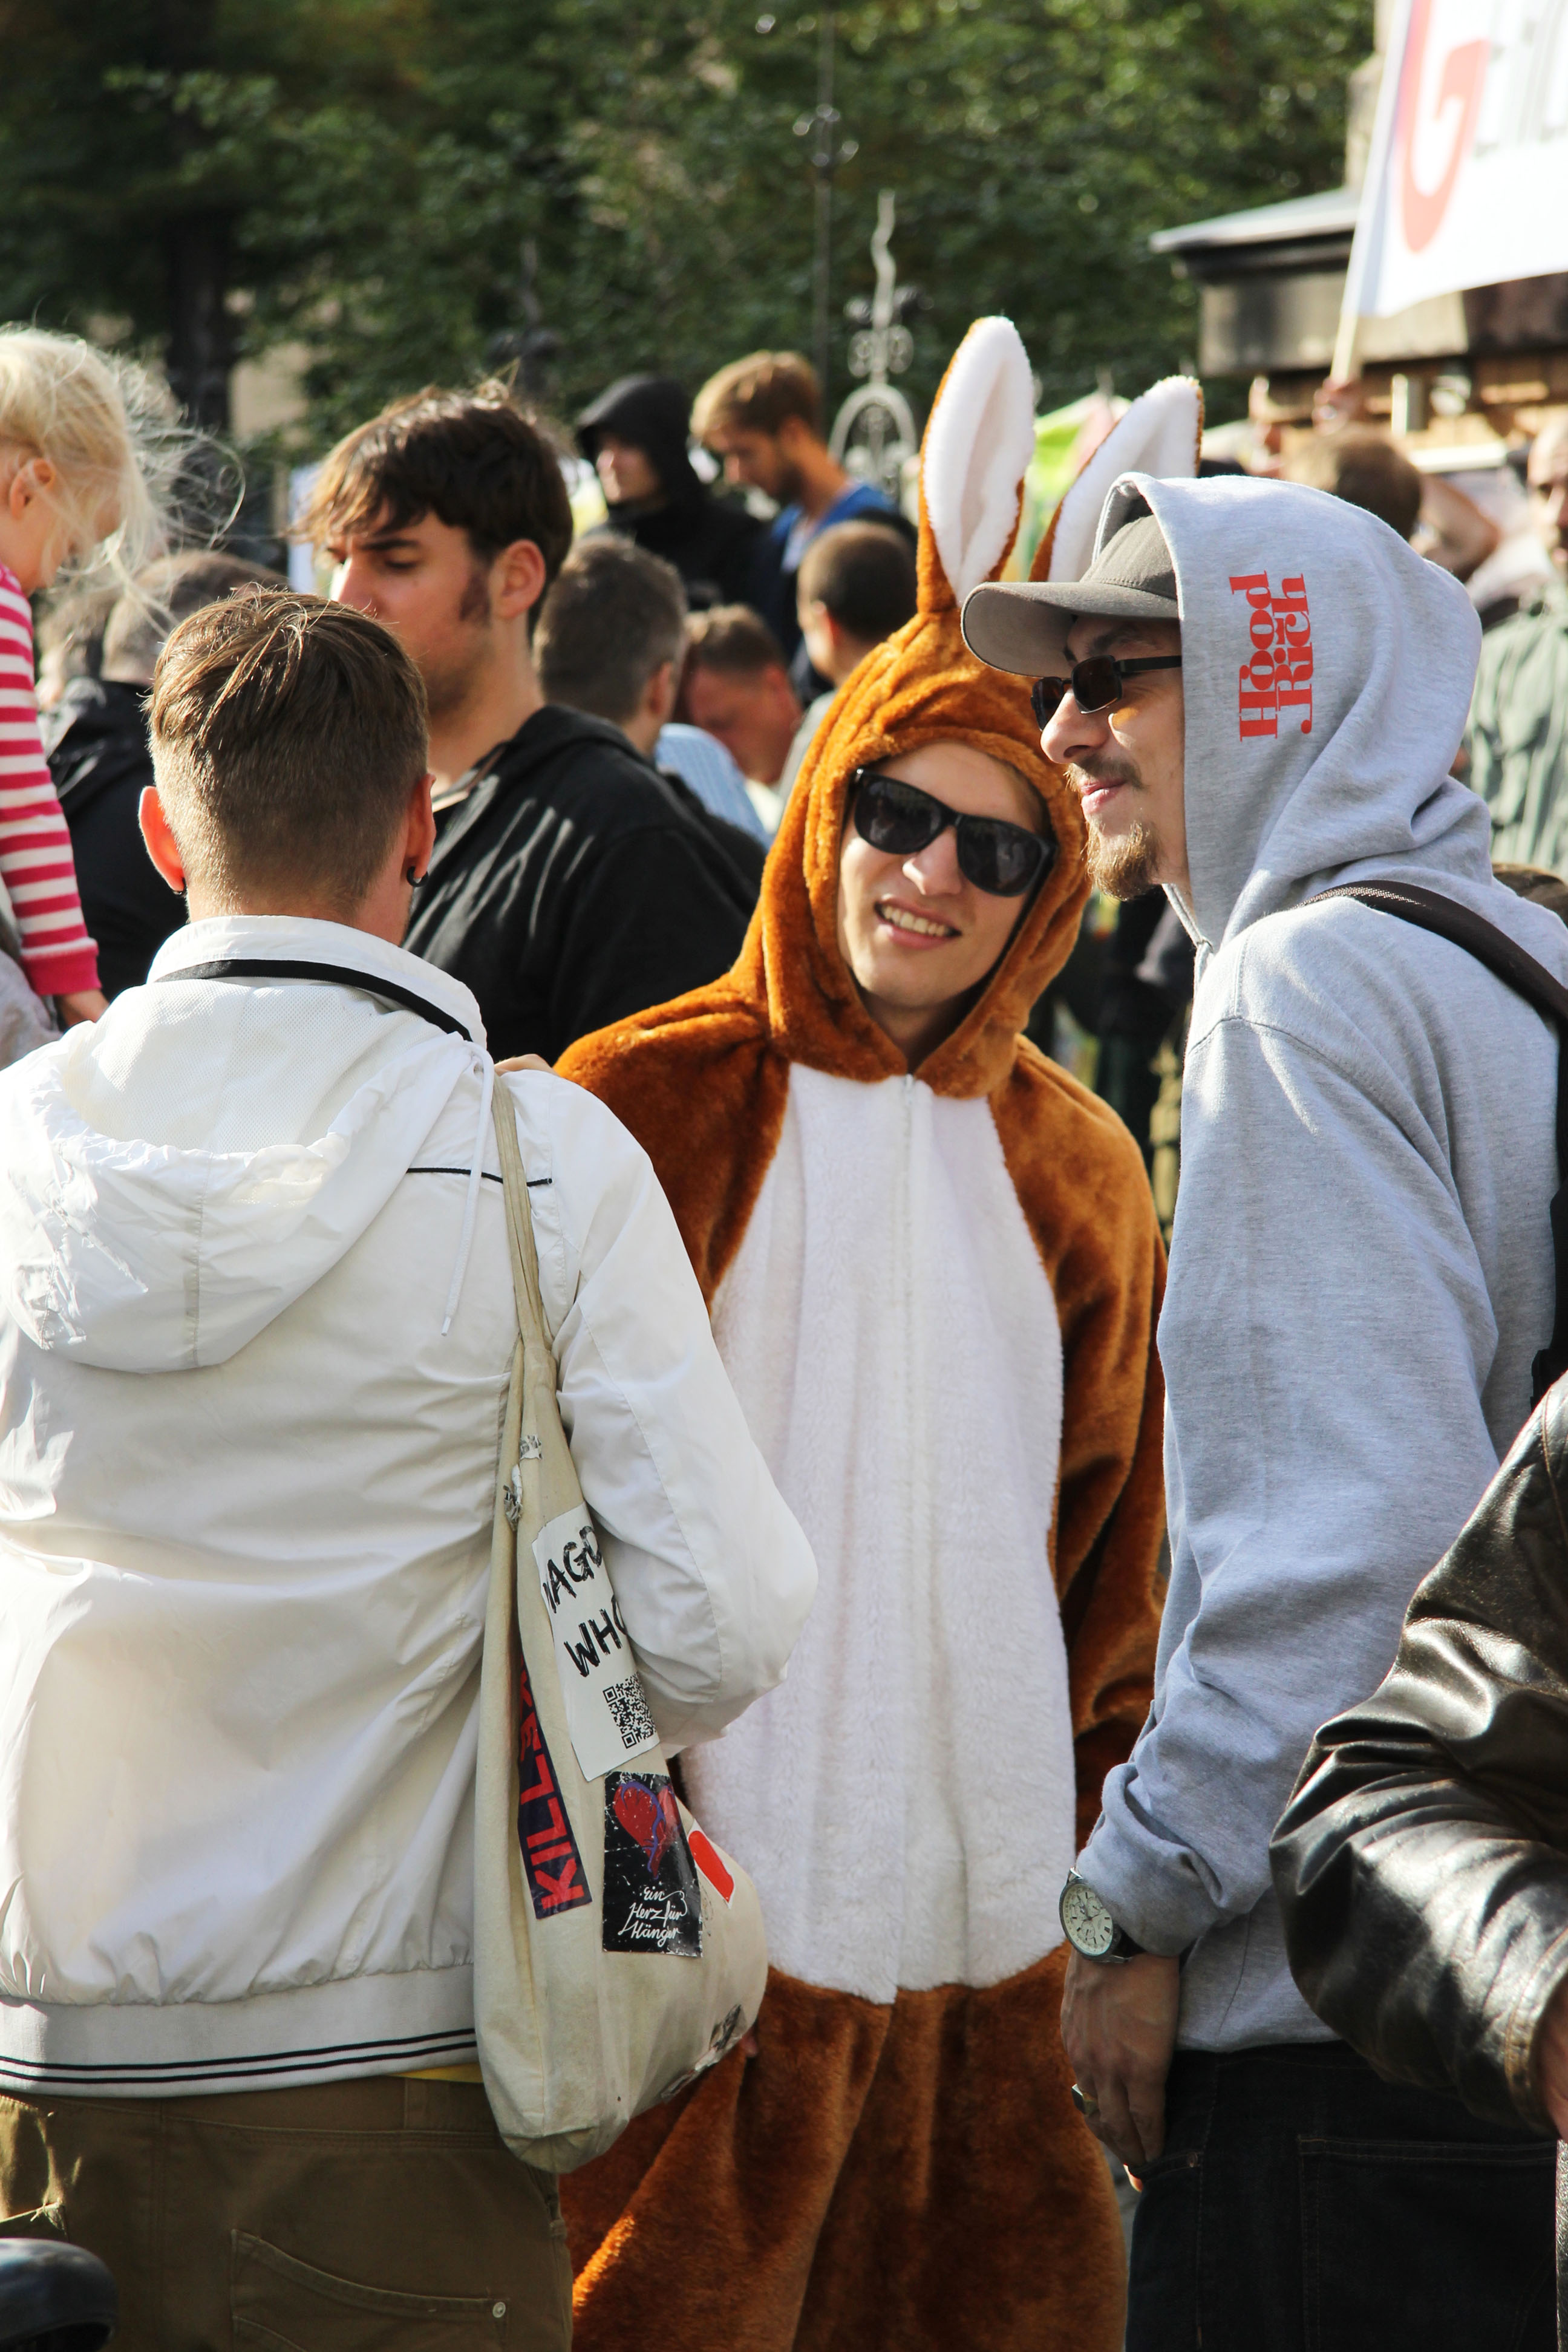 A protester dressed as a rabbit at the GEMA protest at the Kulturbrauerei in Berlin